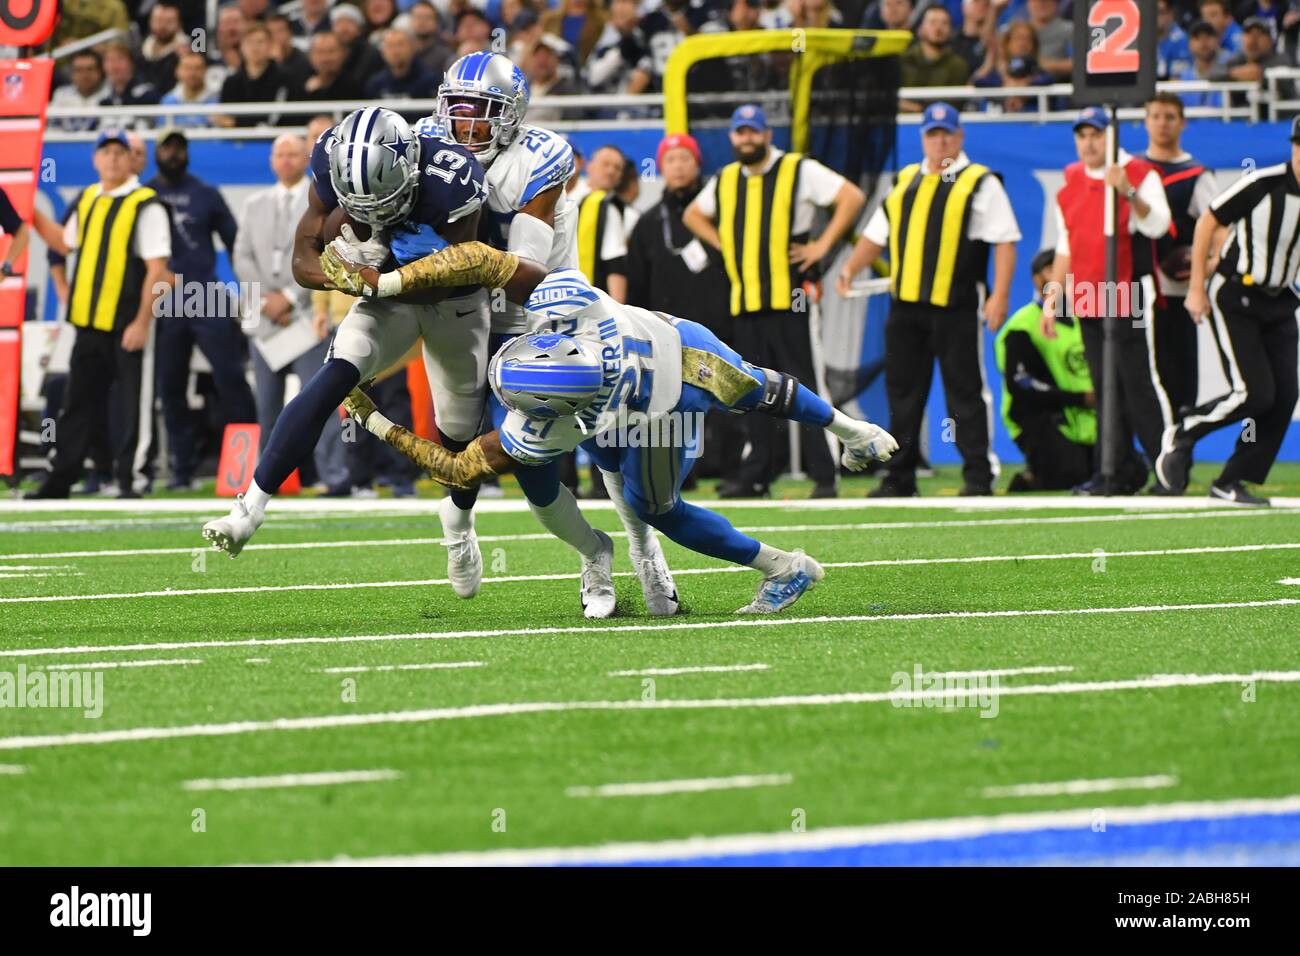 DETROIT, MI - NOVEMBER 17: Detroit Lions S Tracy Walker (21) attempts to tackle Dallas Cowboys WR Michael Gallup (13) during NFL game between Dallas Cowboys and Detroit Lions on November 17, 2019 at Ford Field in Detroit, MI (Photo by Allan Dranberg/Cal Sport Media) Stock Photo